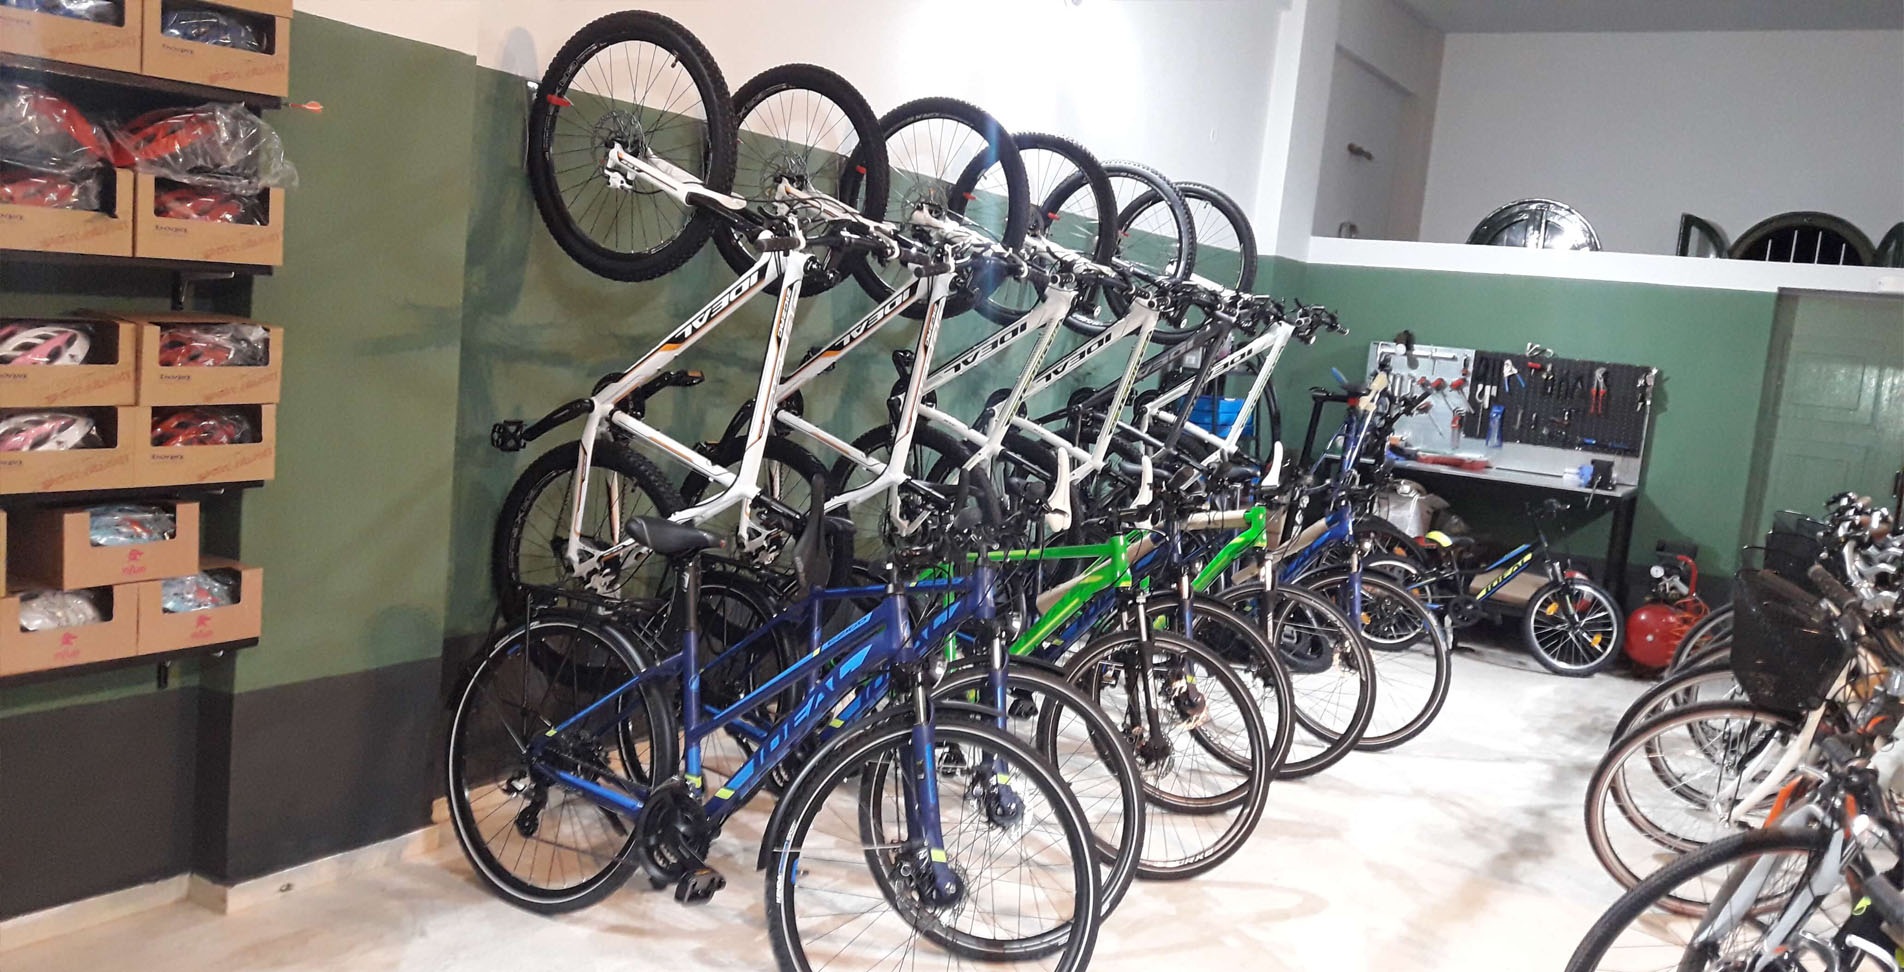 GEO bicycling &amp; more: Bicycle Rentals and Tours in CORFU